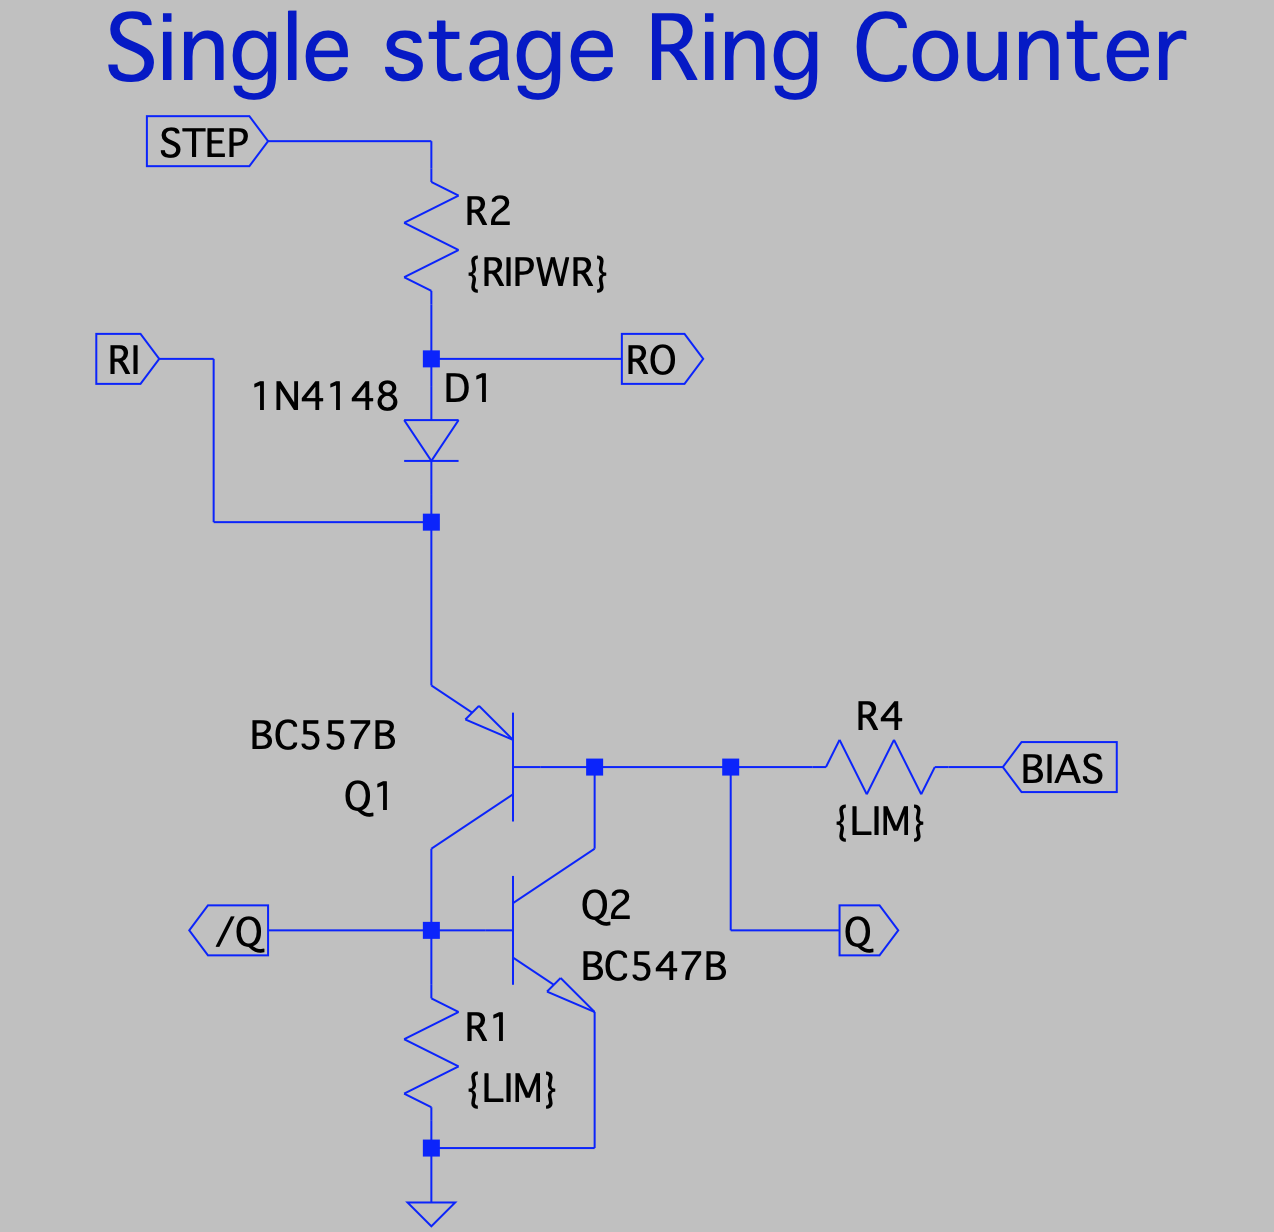 Single stage of the ring counter